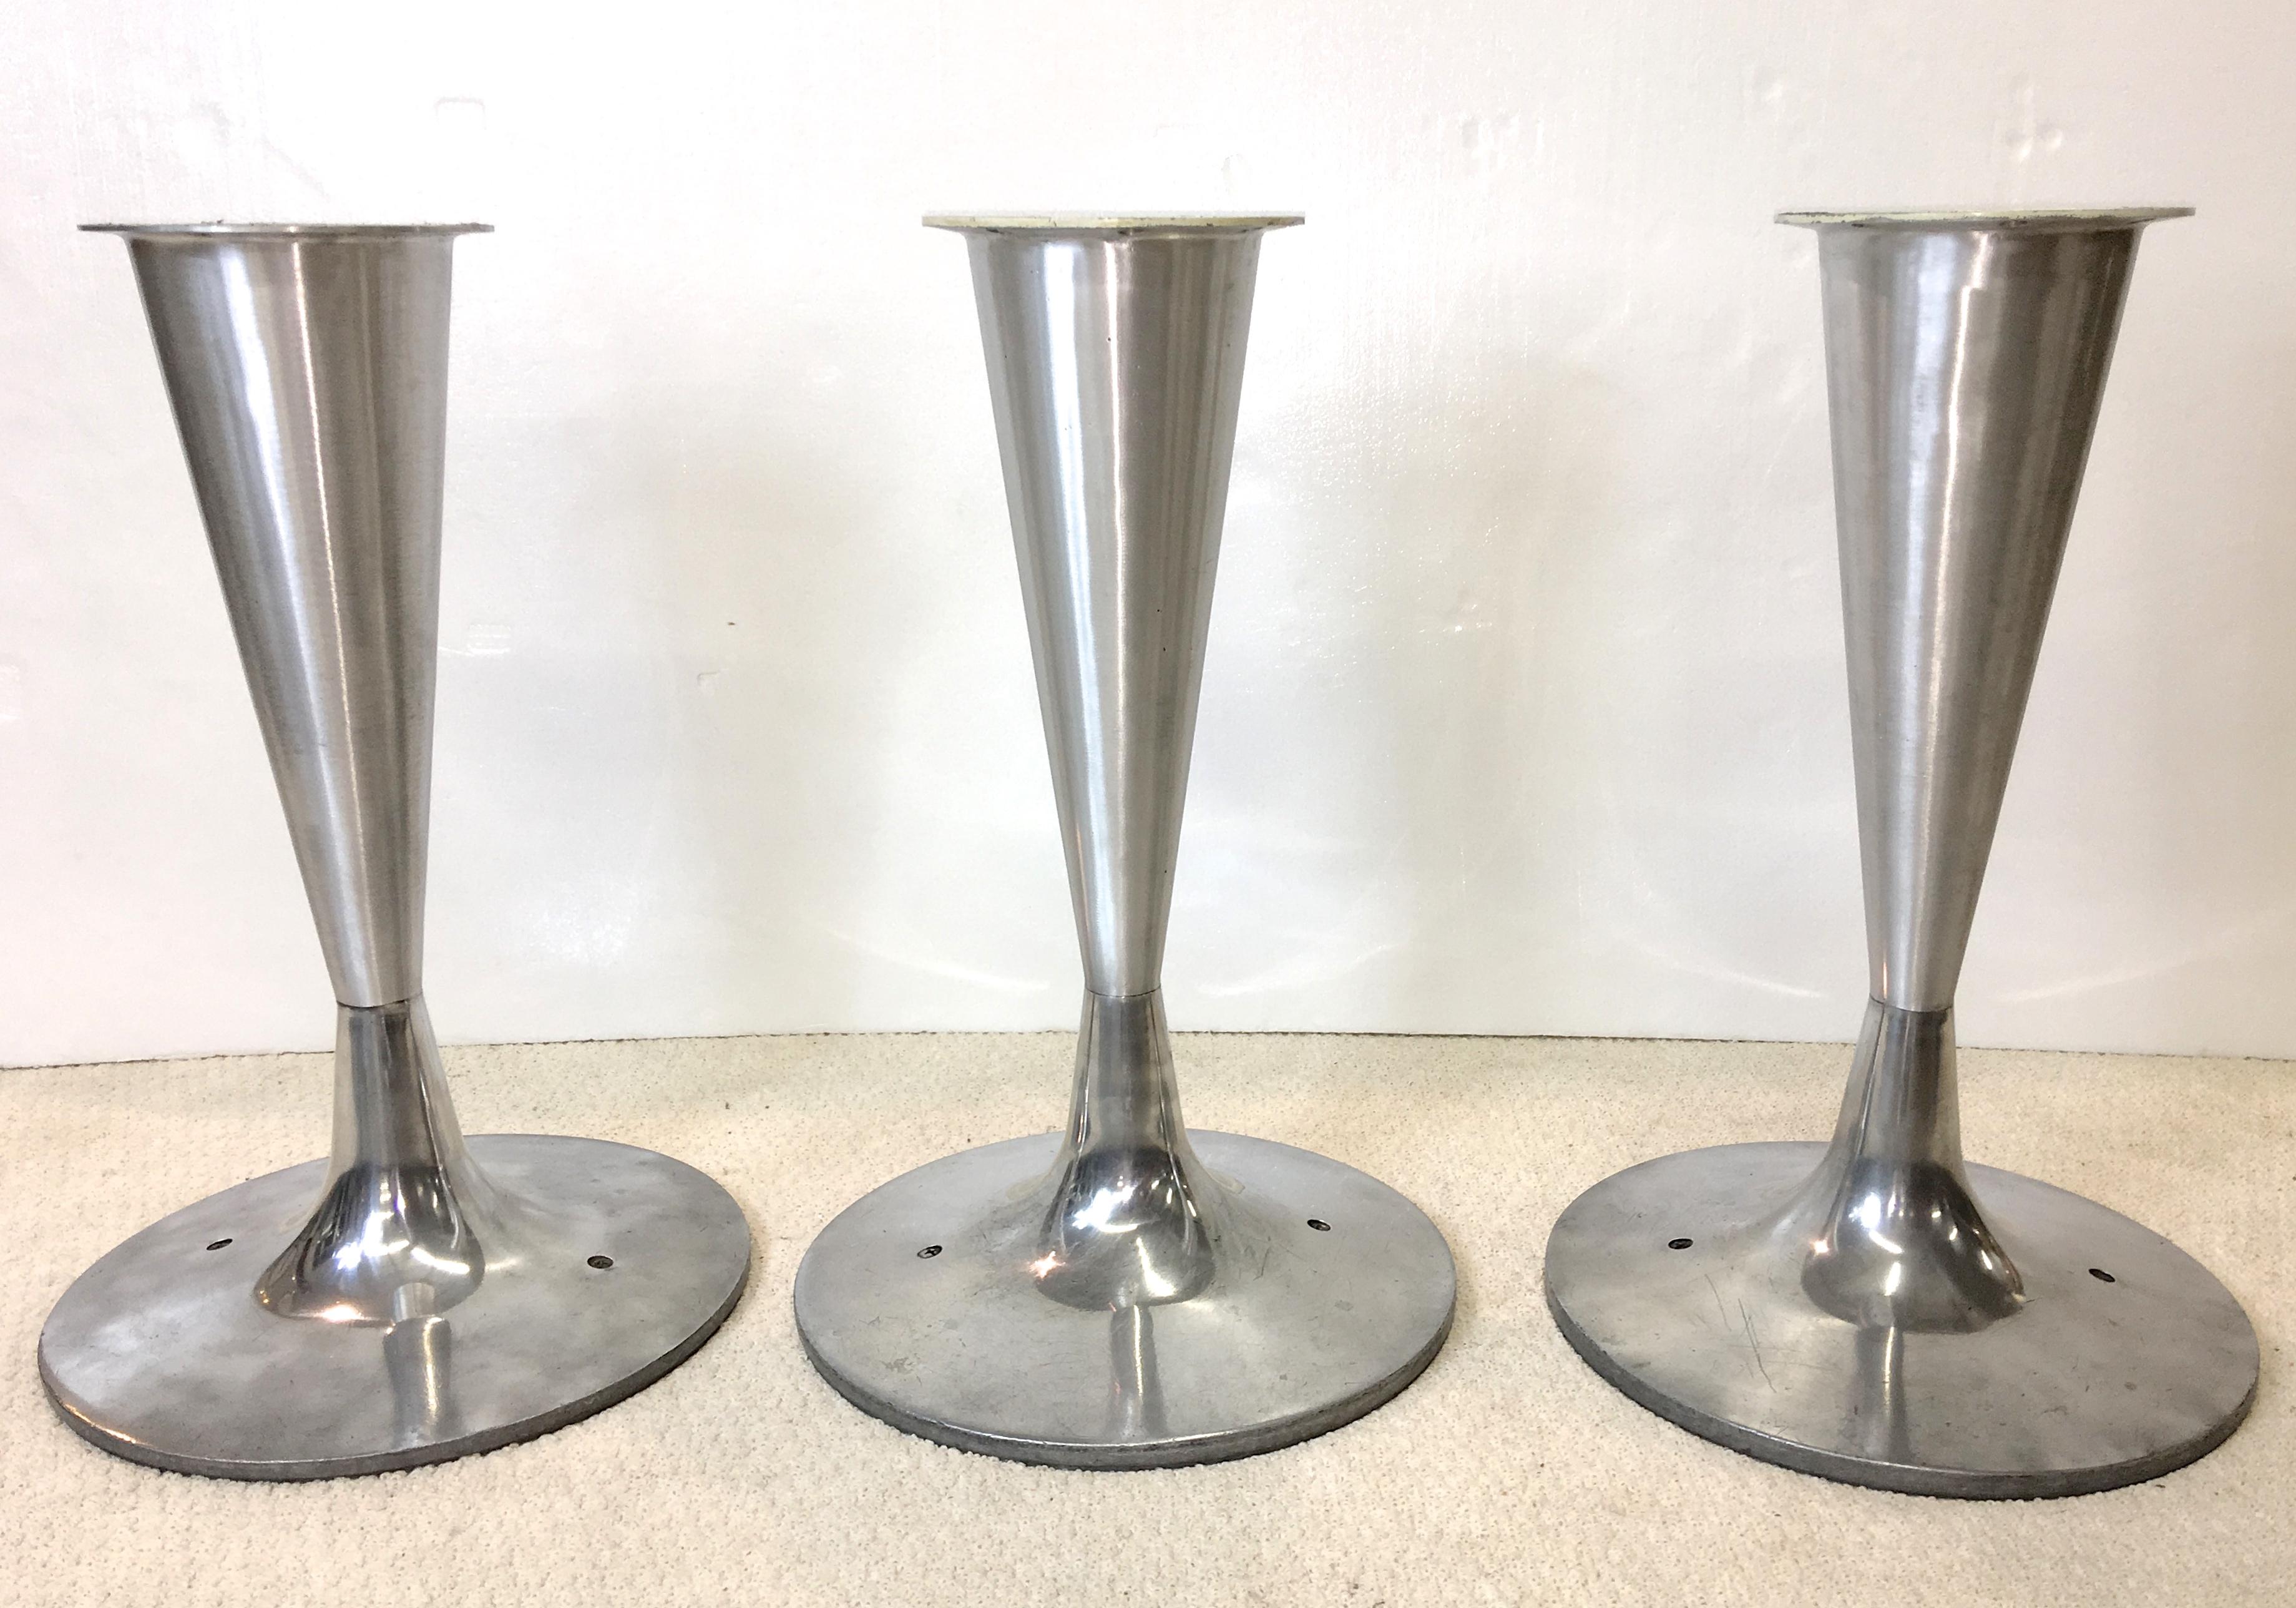 We have a total of three of these 29 inch high 36 inch round pedestal refreshment tables from the now defunct Bowl-O-Mat in Beverly, Massachusetts produced by Brusnwick Corporation in 1962. During the preceding year there was a business combination